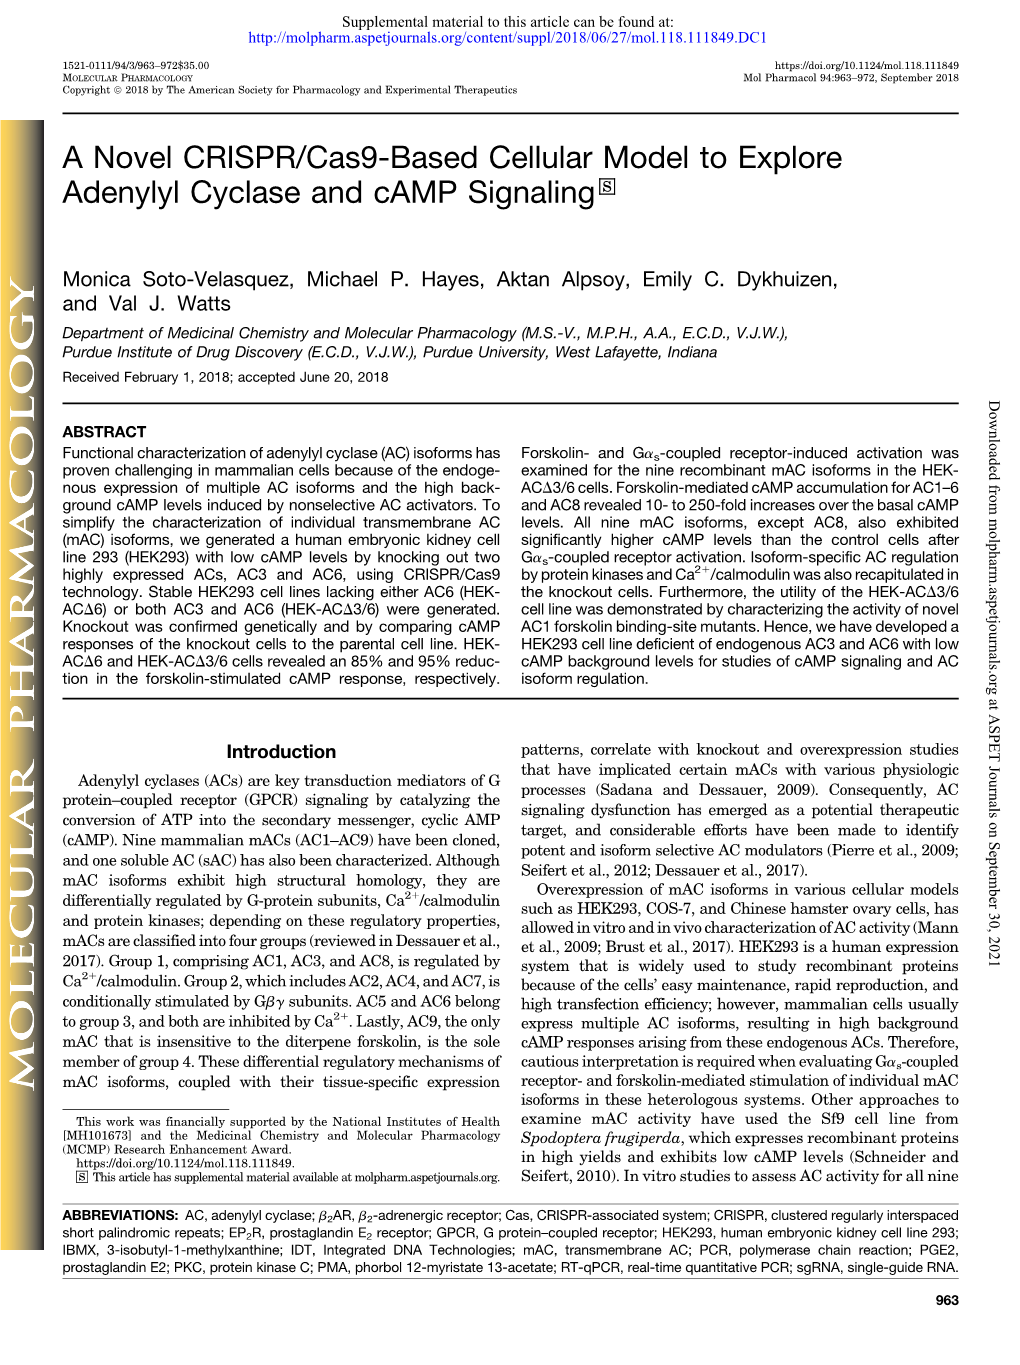 A Novel CRISPR/Cas9-Based Cellular Model to Explore Adenylyl Cyclase and Camp Signaling S